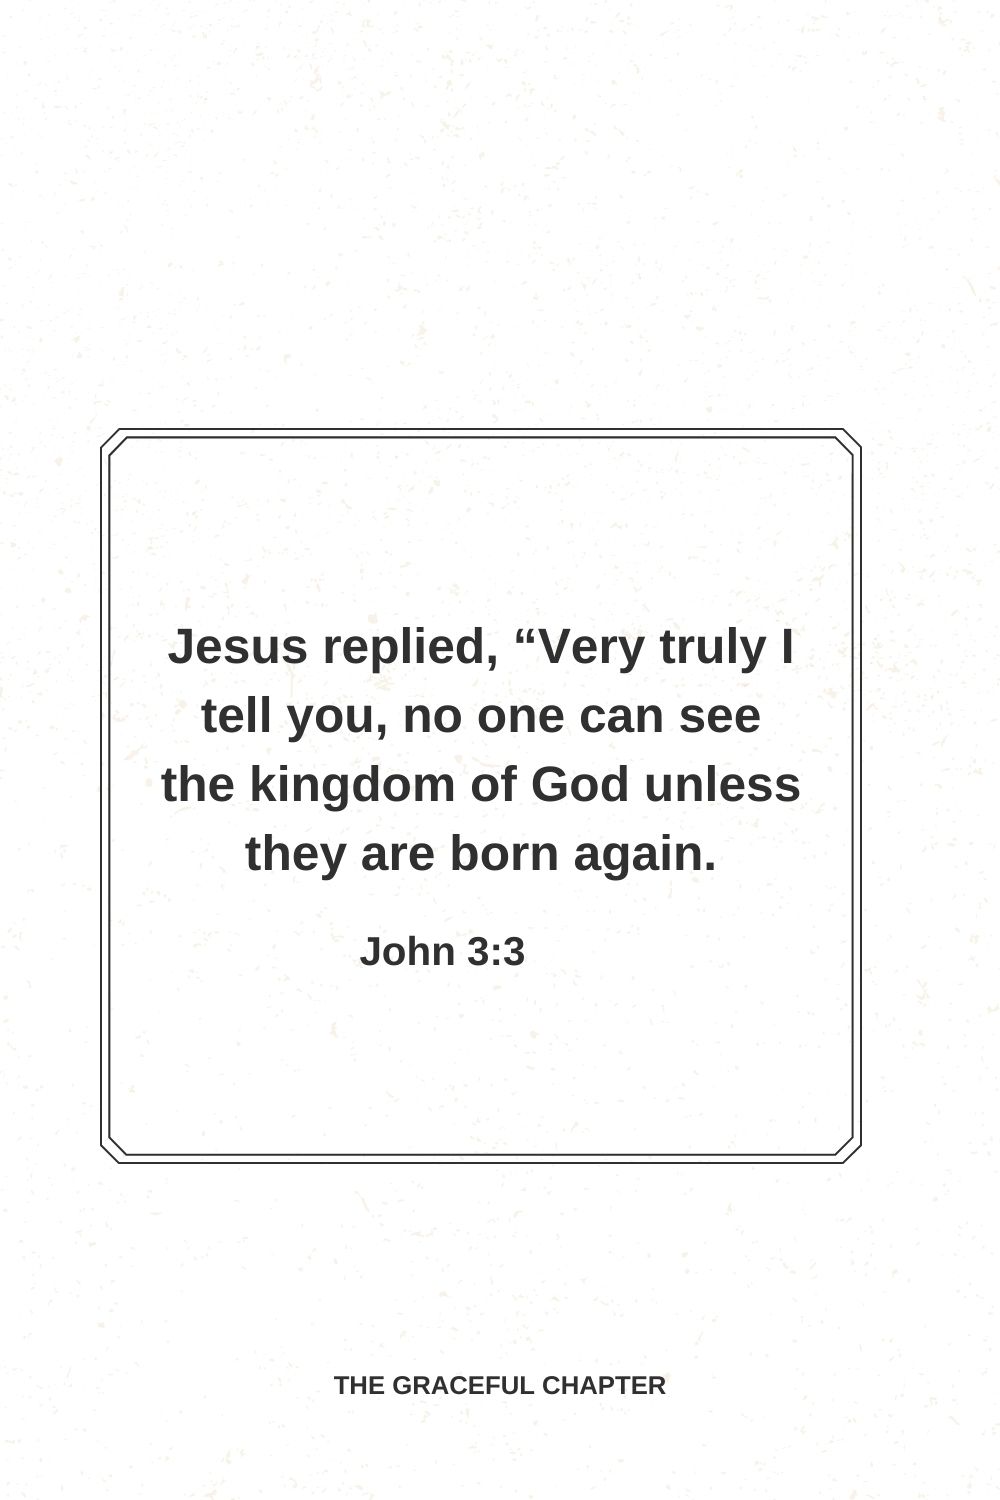 Jesus replied, “Very truly I tell you, no one can see the kingdom of God unless they are born again. John 3:3